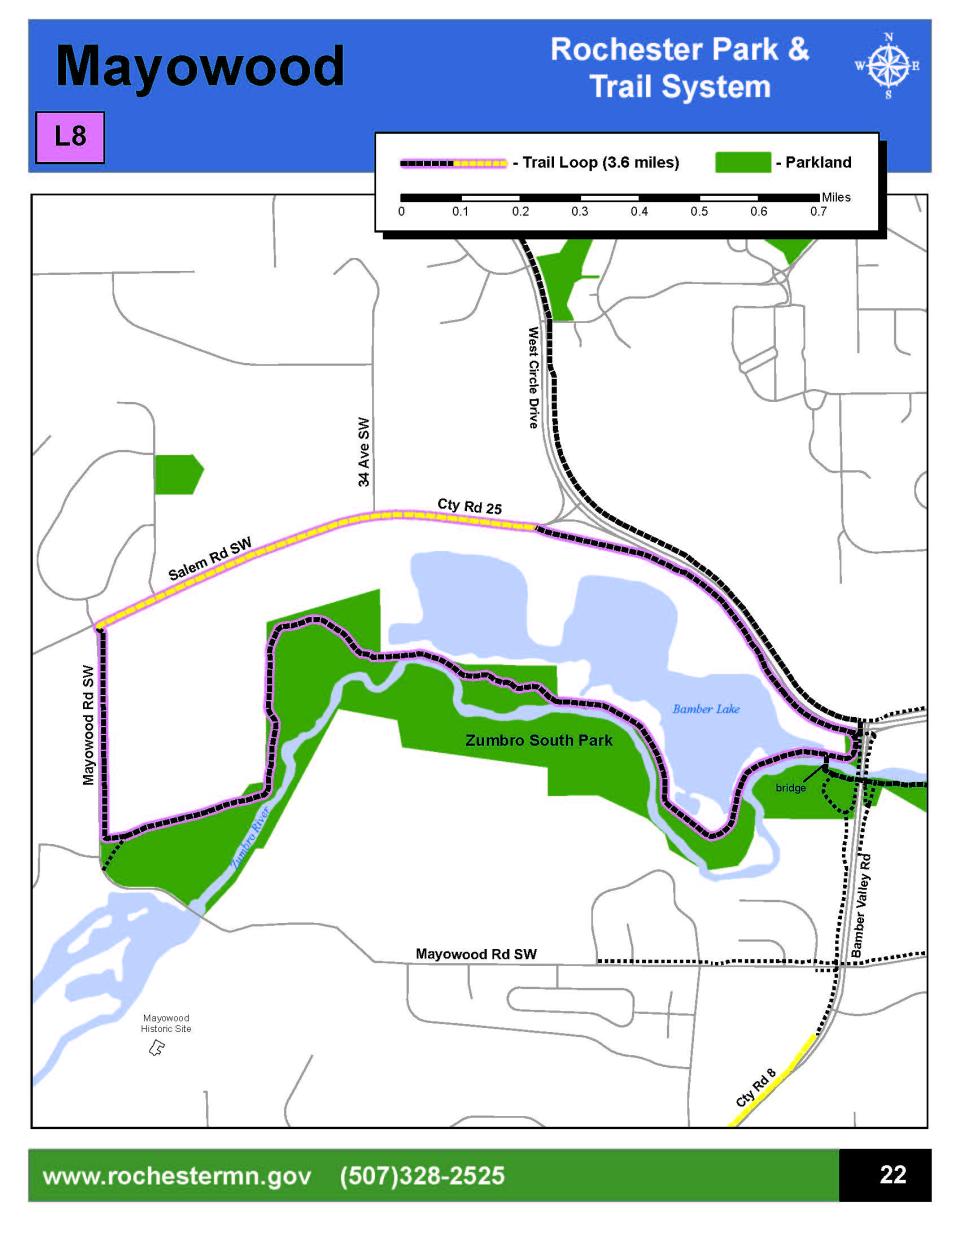 Mayowood Trail System Map - City of Rochester